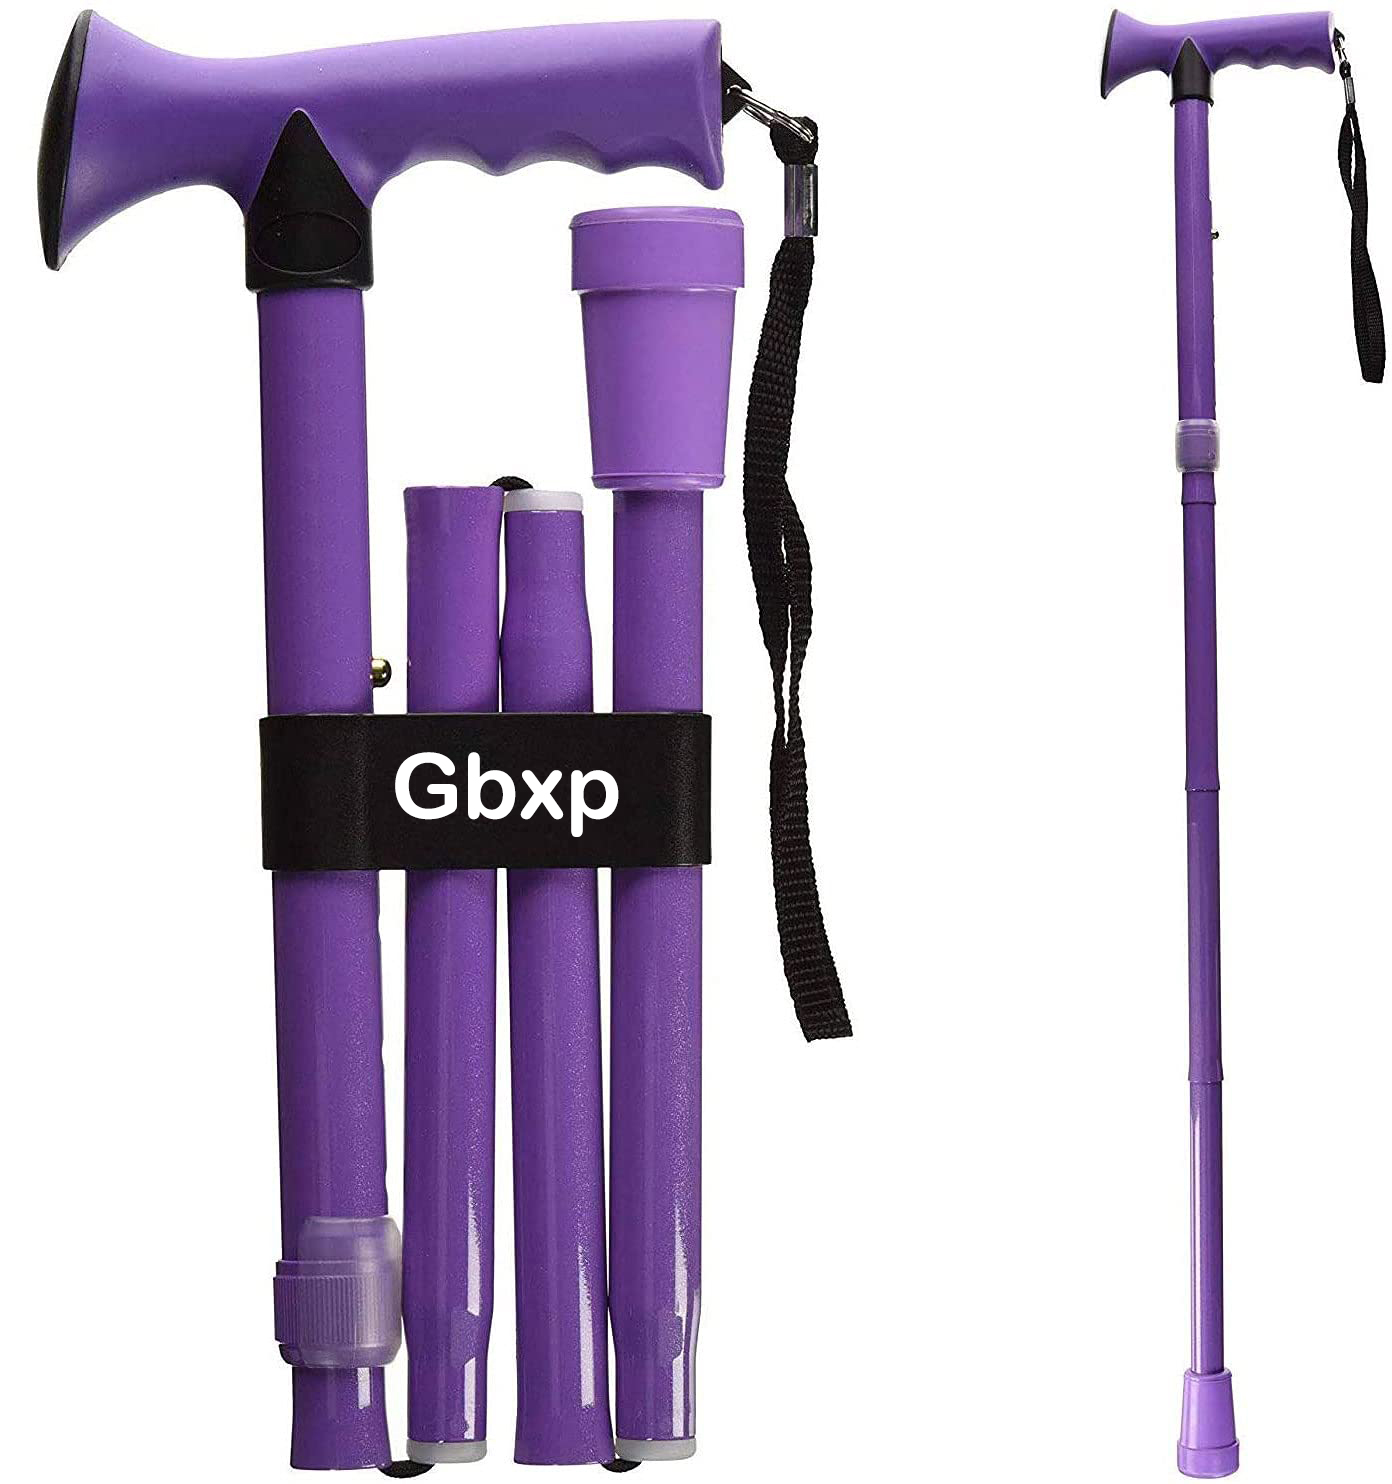 Gbxp walking cane for medical devices Folding Walking Stick, Soft Comfort Grip Collapsible Walking Stick, Adjustable Folding Walking Cane, Lavender